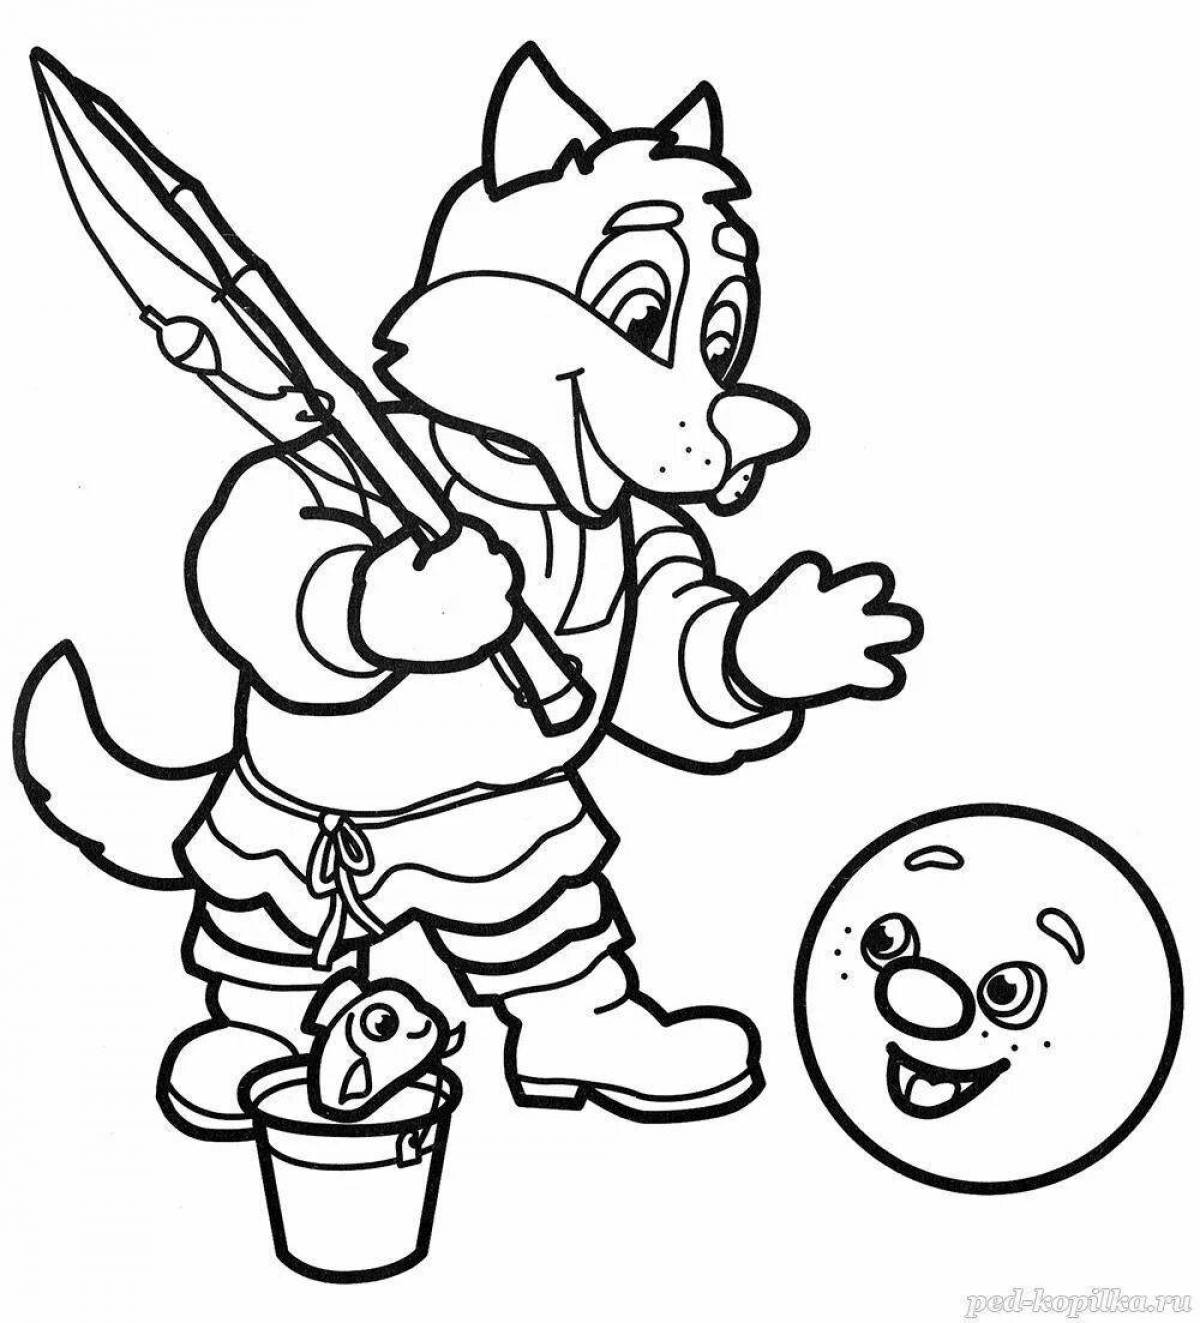 Coloring book brave wolf